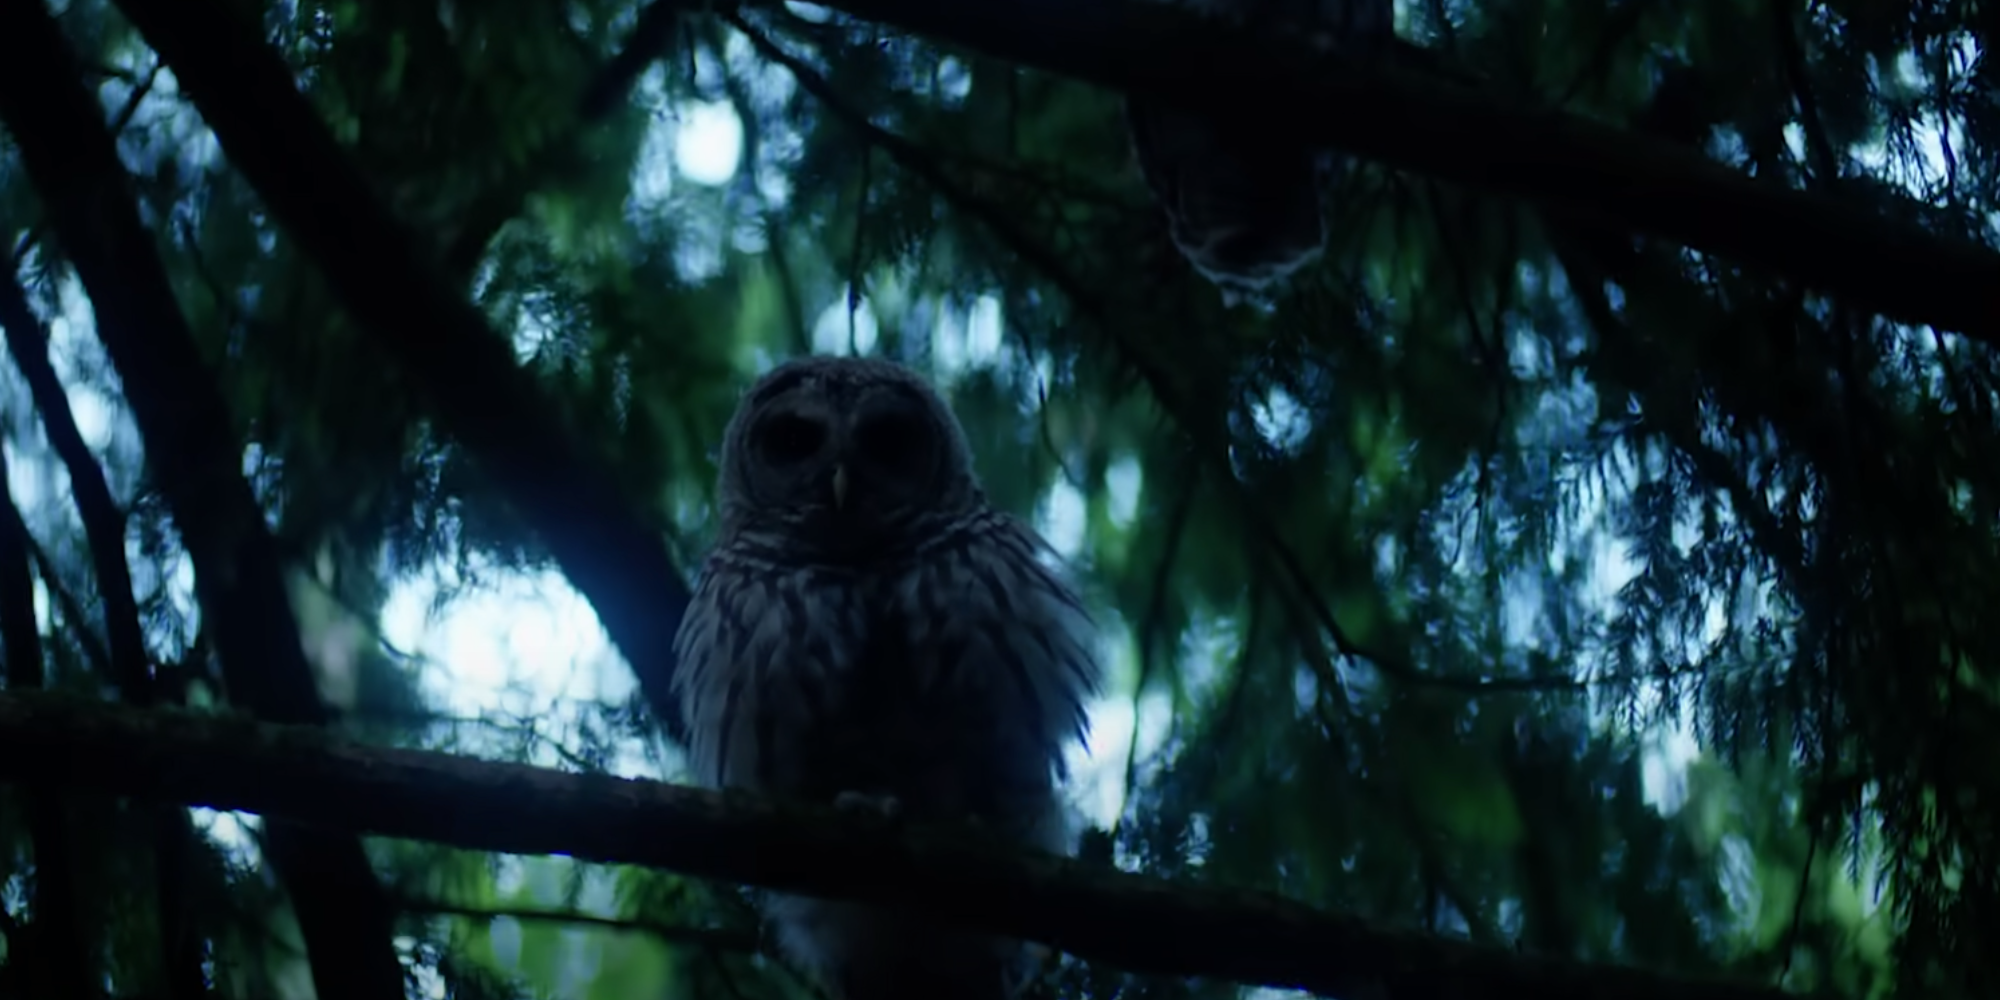 Two owls looking down from trees in Percy Jackson and the Olympians